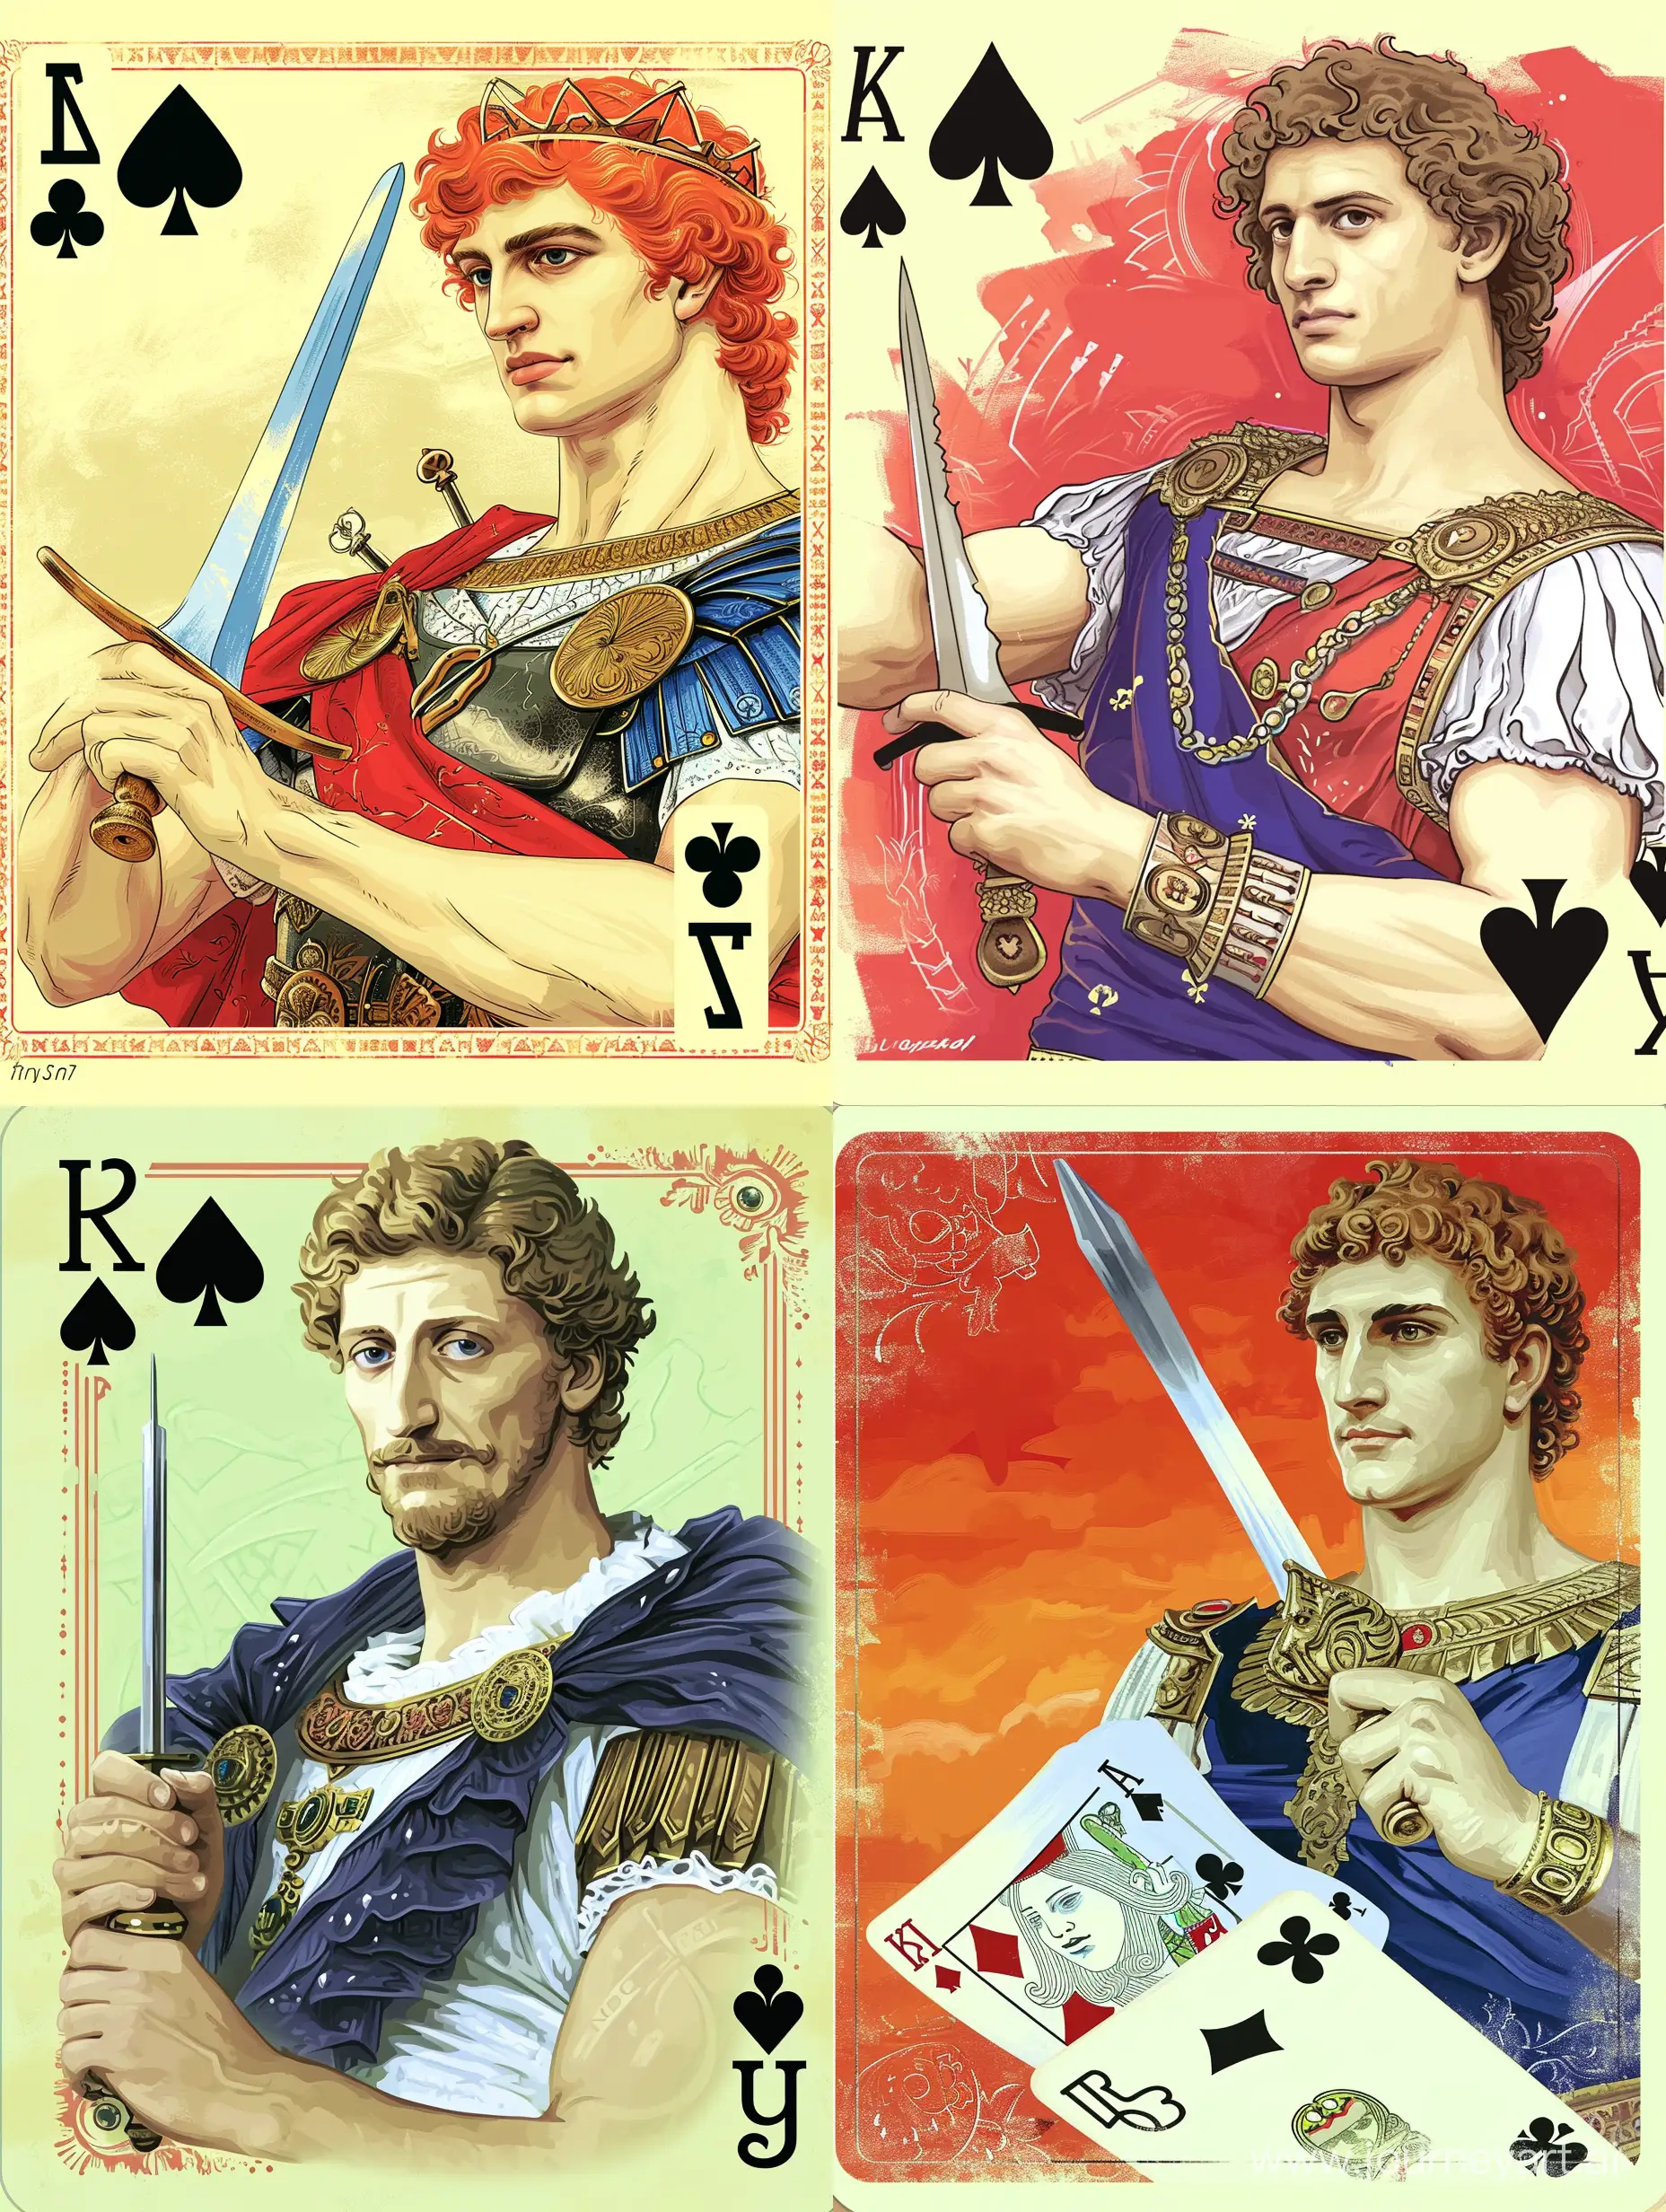 Playing card design, King of clubs, Alexander the Great, vector illustration style, bright colors, in the style of Alphonse Mucha